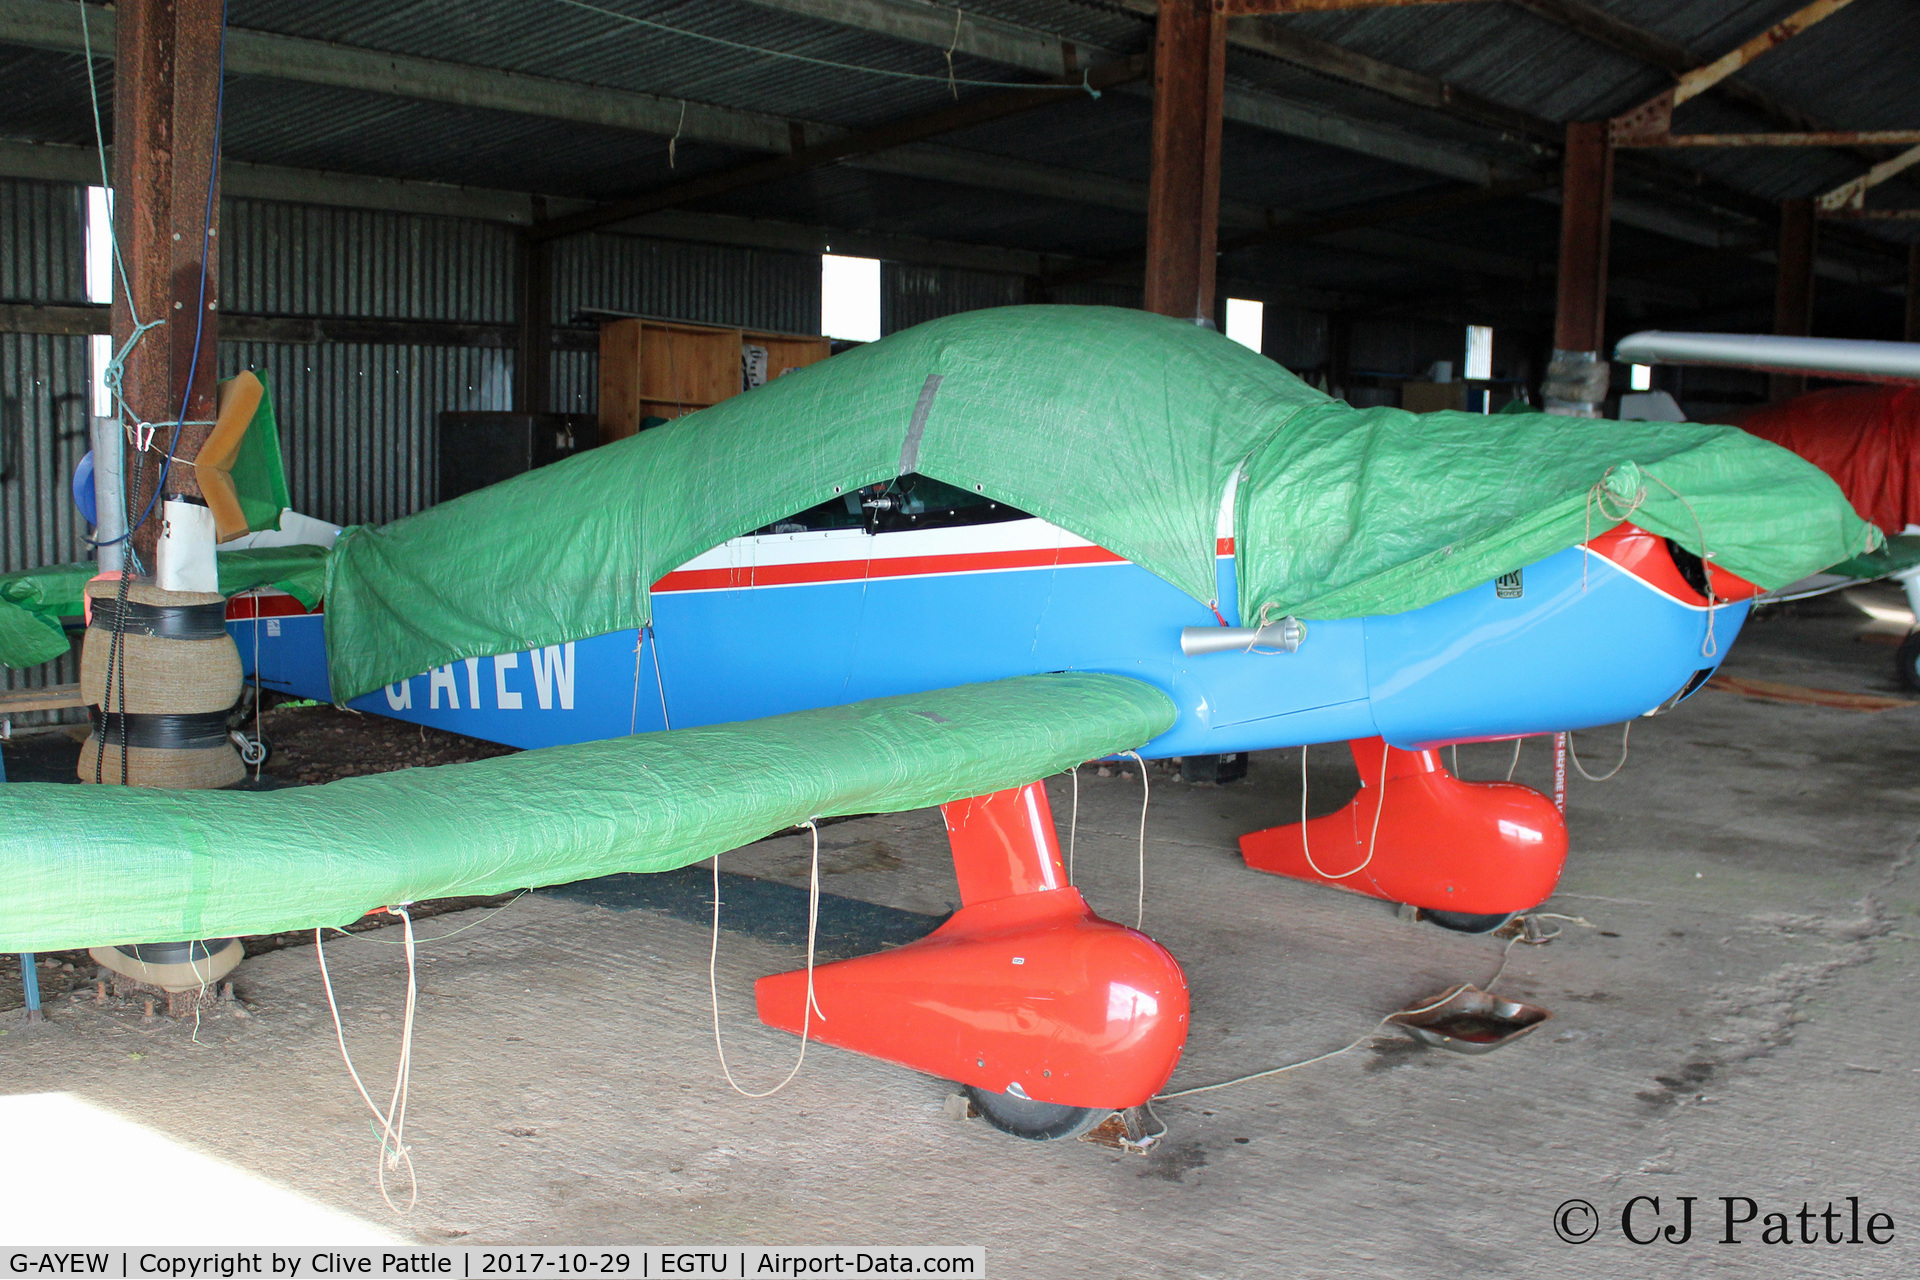 G-AYEW, 1963 CEA Jodel DR.1051 Sicile C/N 443, Hangared at Dunkeswell